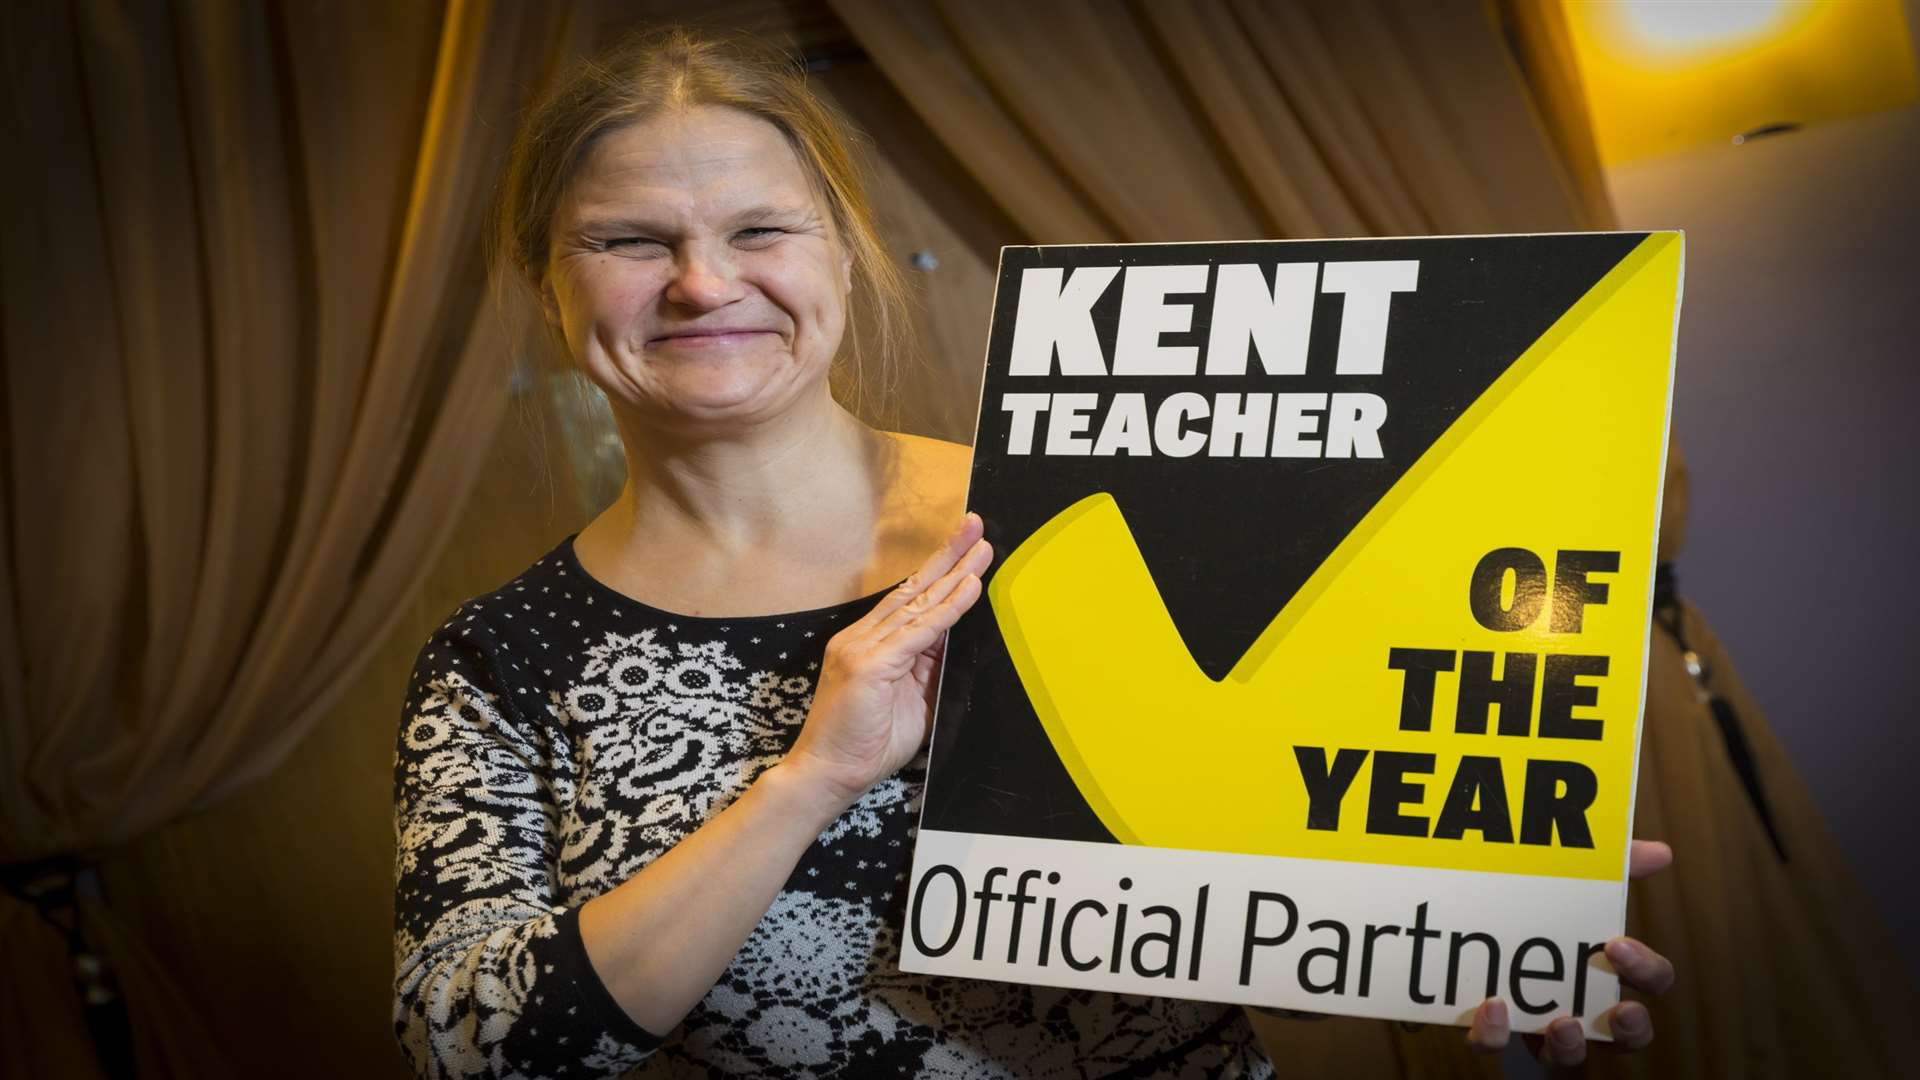 Malou Bengstsson-Wheeler of Beanstalk which is supporting the Kent Teacher of the Year Awards 2018.